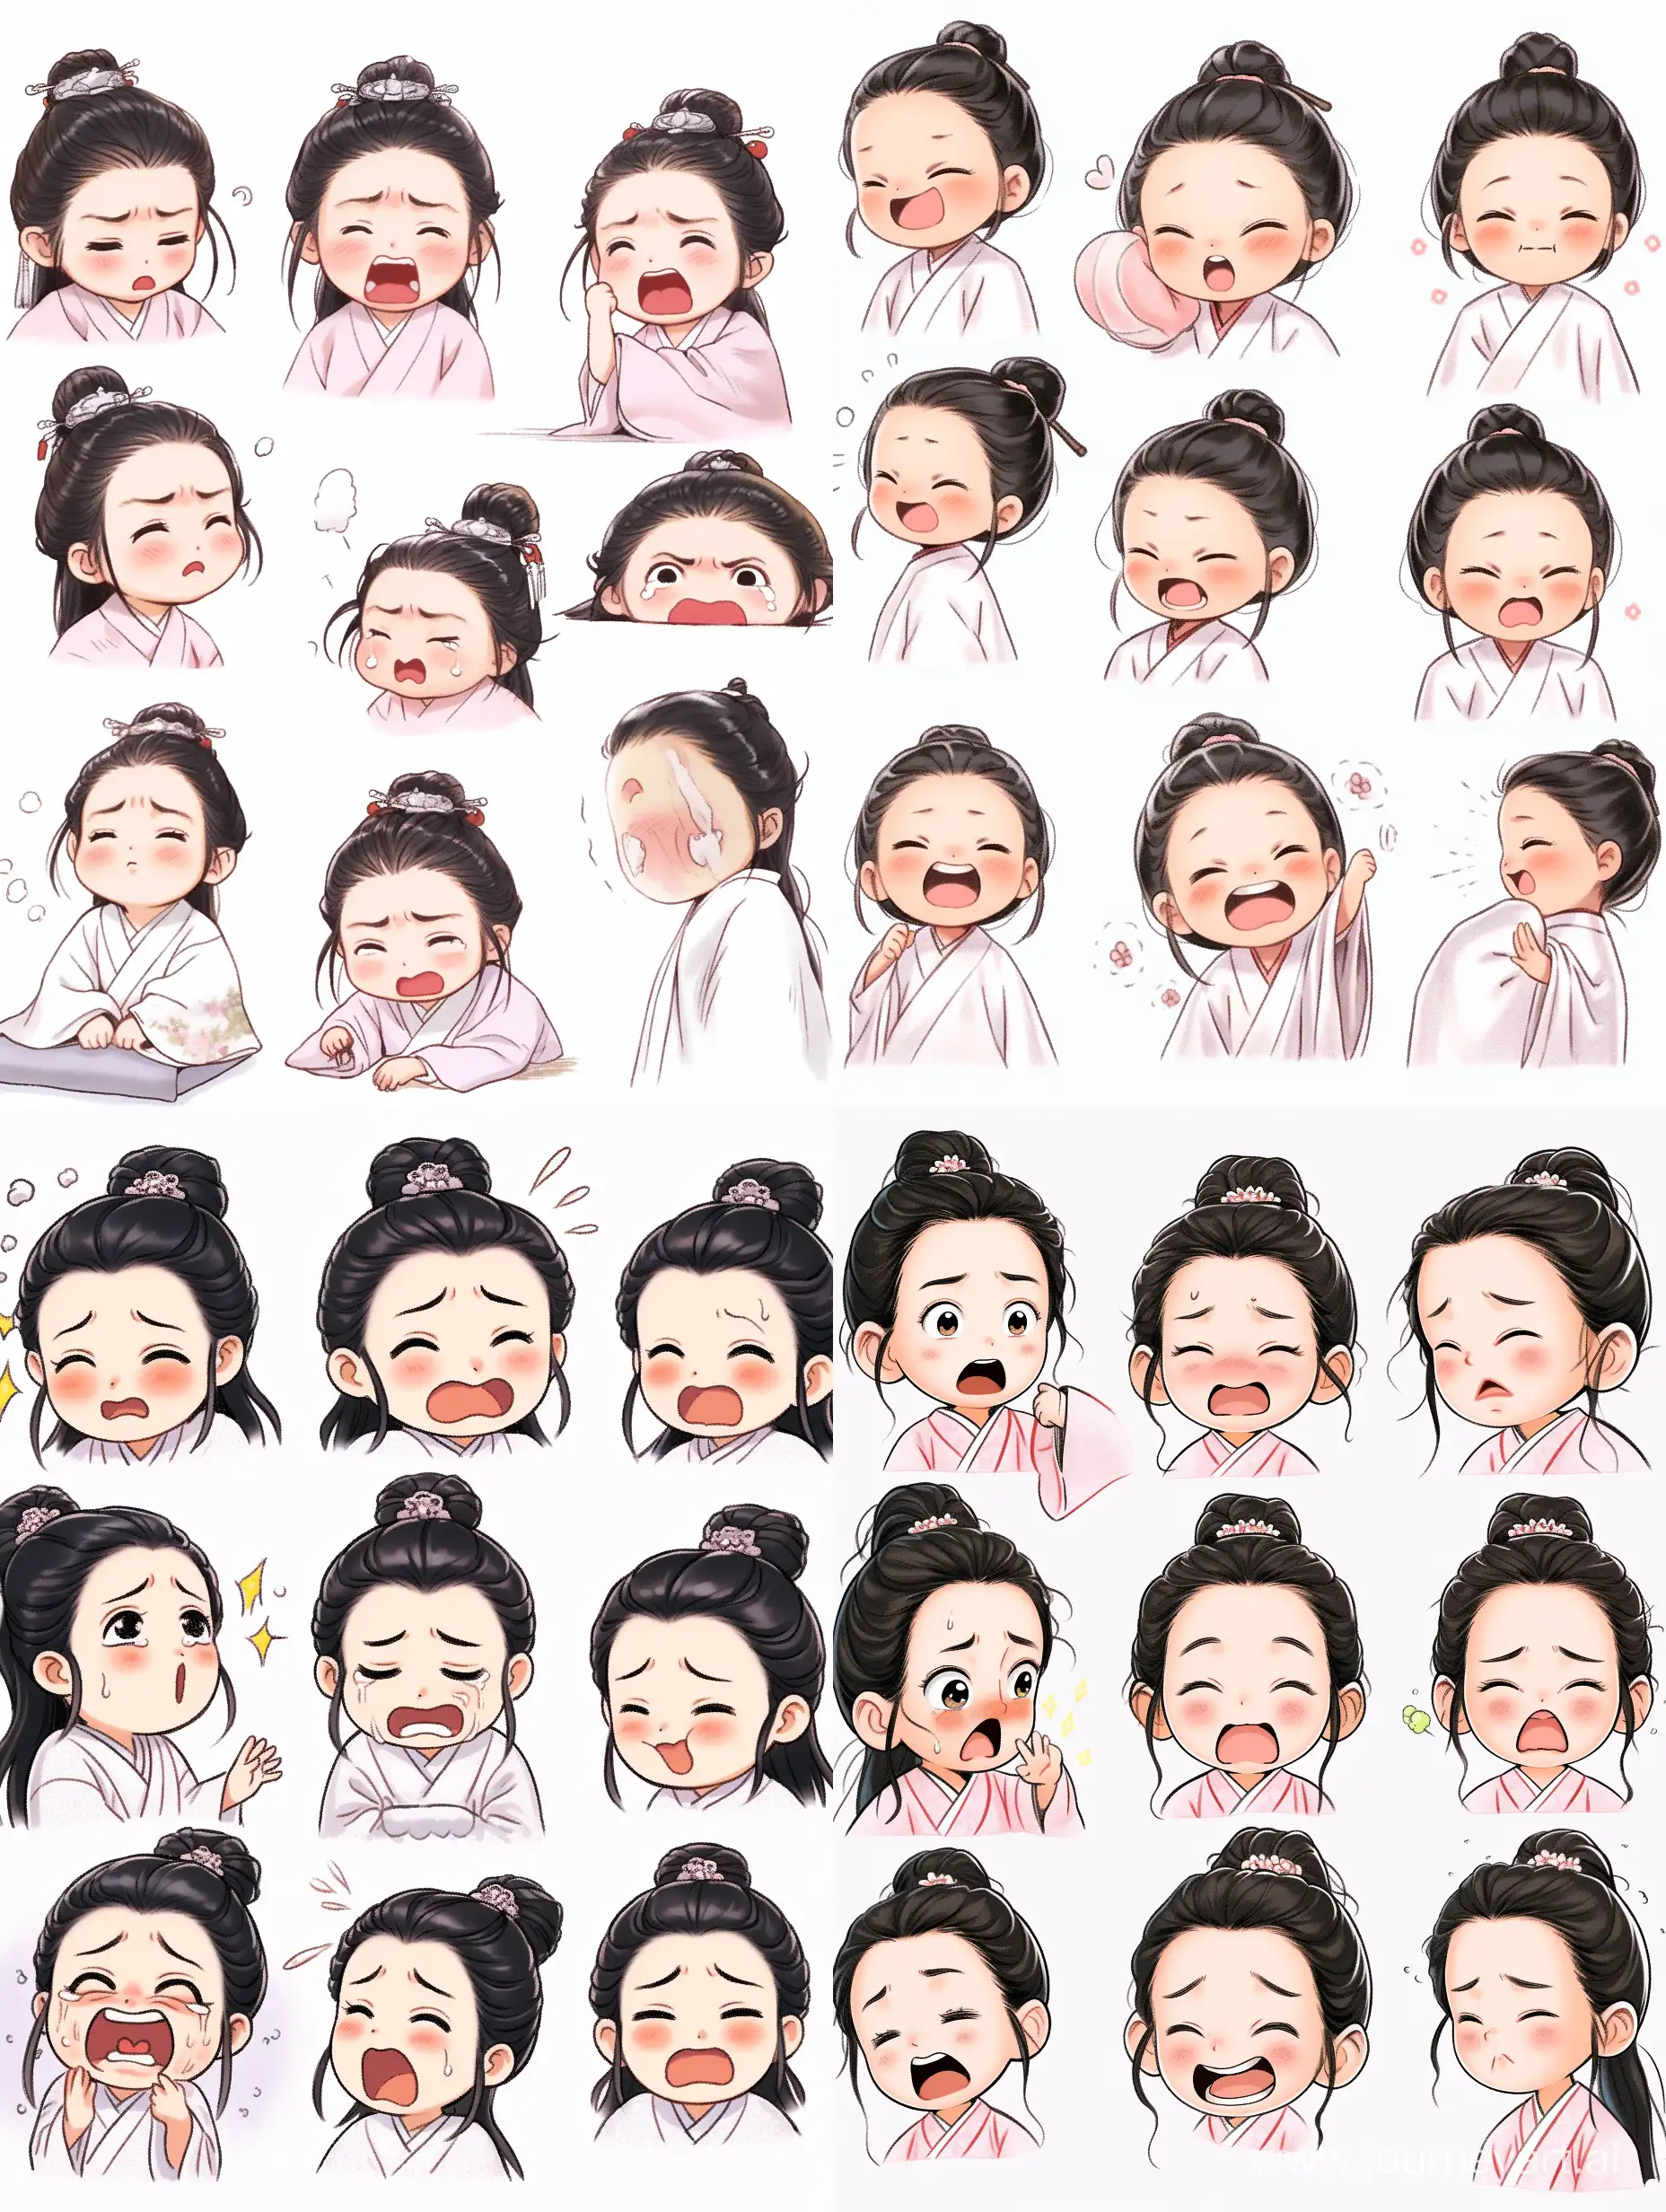 Adorable-Little-Girl-in-Traditional-Chinese-Robe-Expressing-Various-Emotions-with-Cute-and-Exquisite-Details